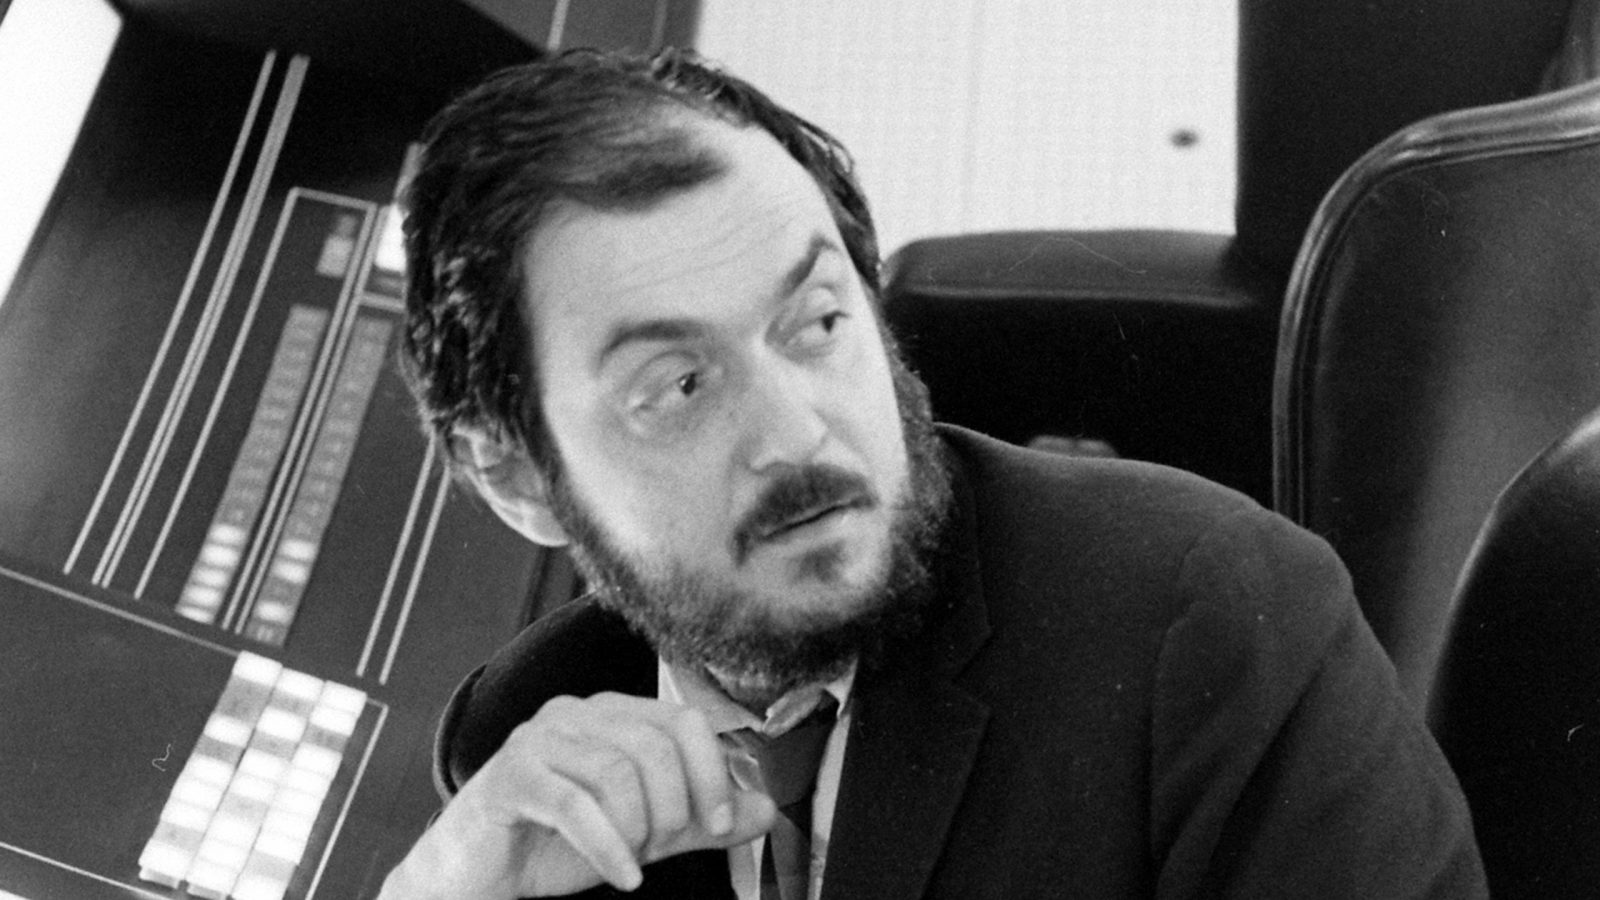 Passing This General Knowledge Quiz Means You Know Lot About Everything Stanley Kubrick